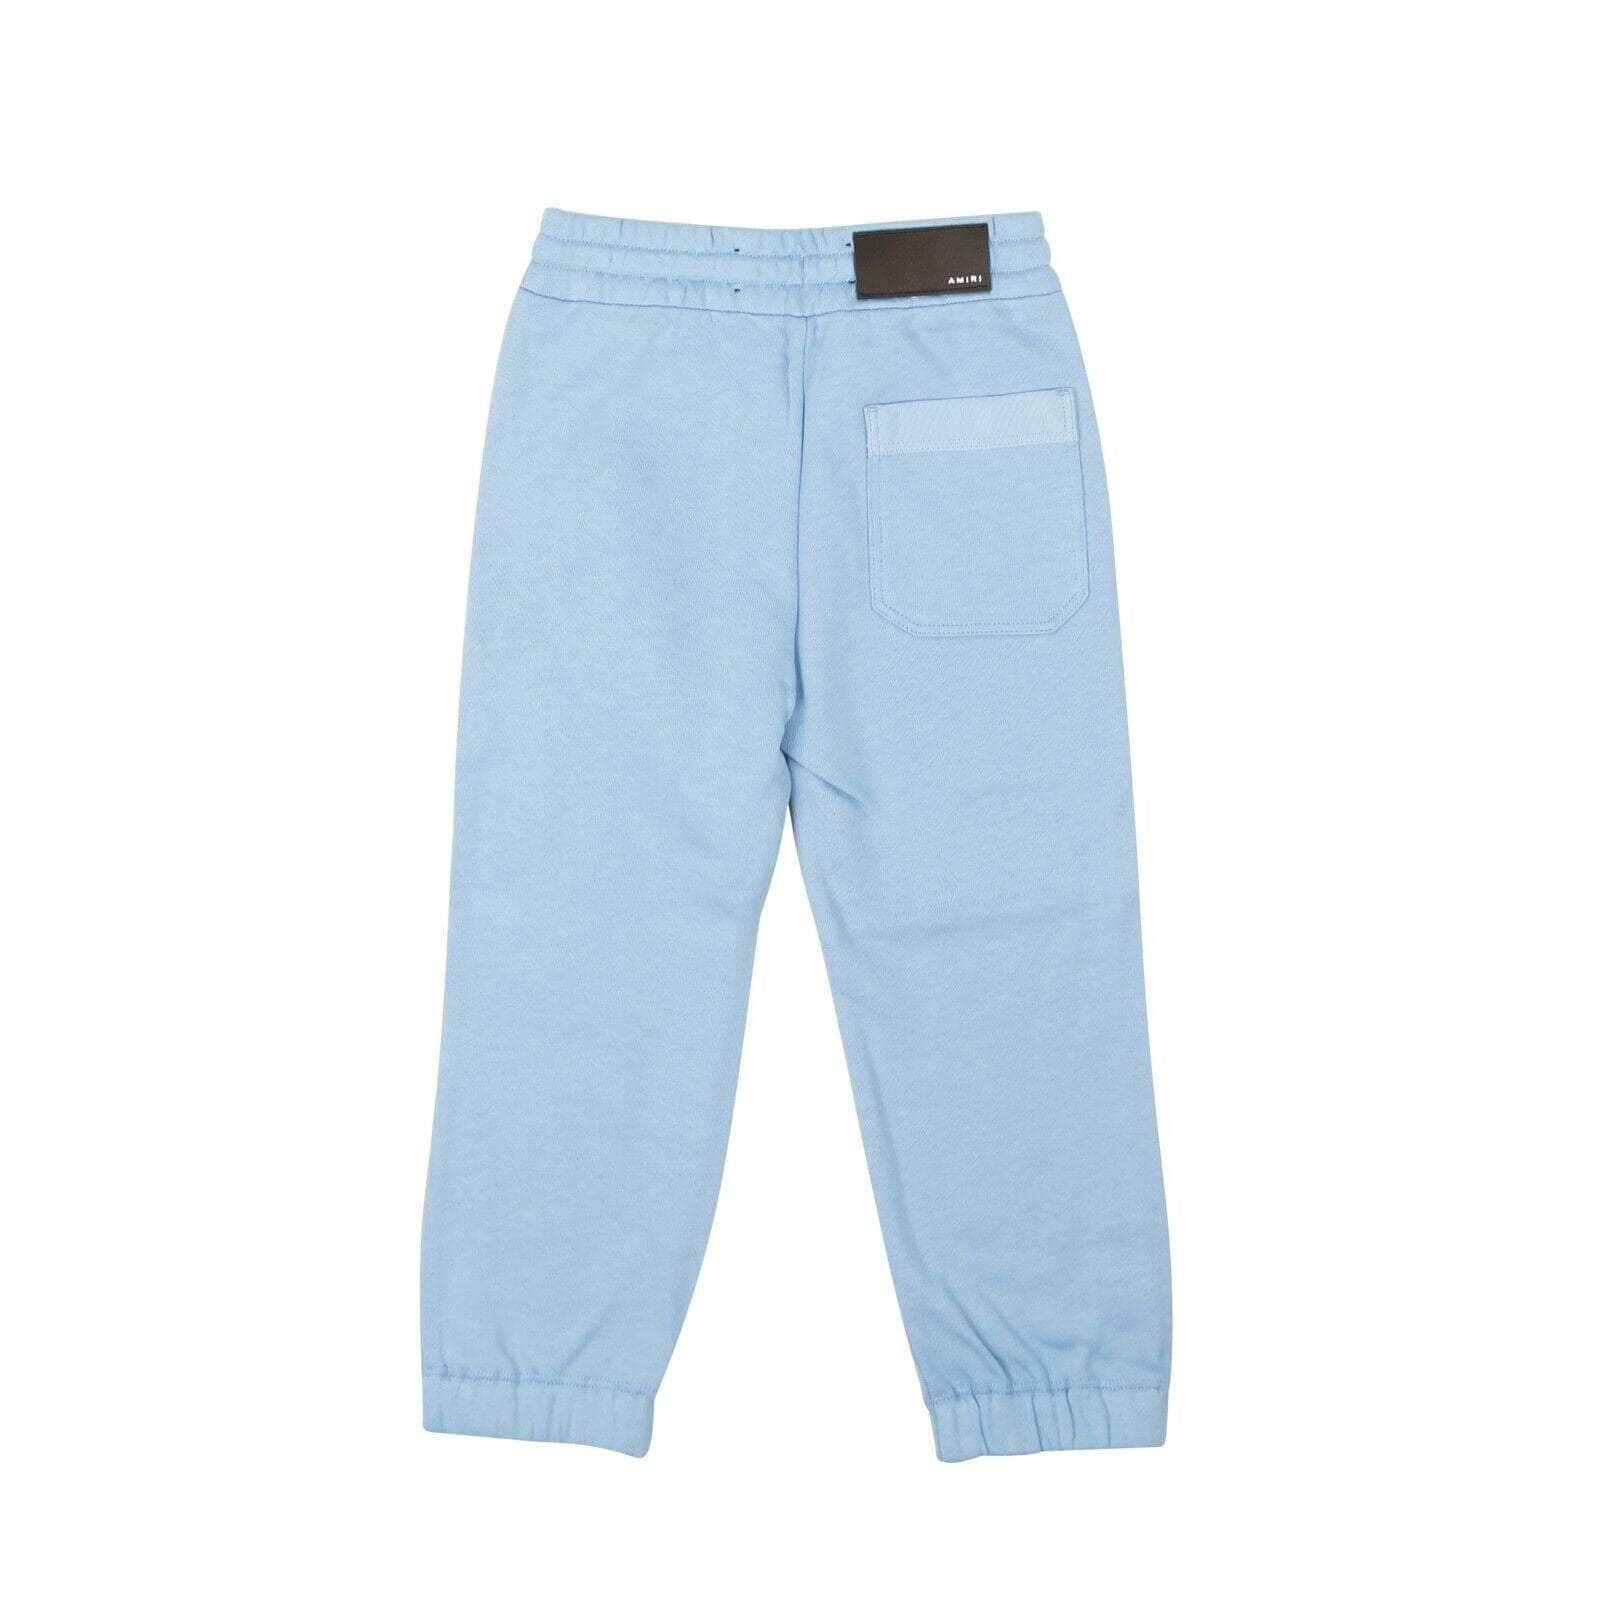 Amiri 250-500, amiri, boys-sweatpants-joggers, channelenable-all, chicmi, couponcollection, gender-womens, main-clothing, size-10, size-4, size-6, SPO Boy's Baby Blue Logo Classic Jogger Sweatpants